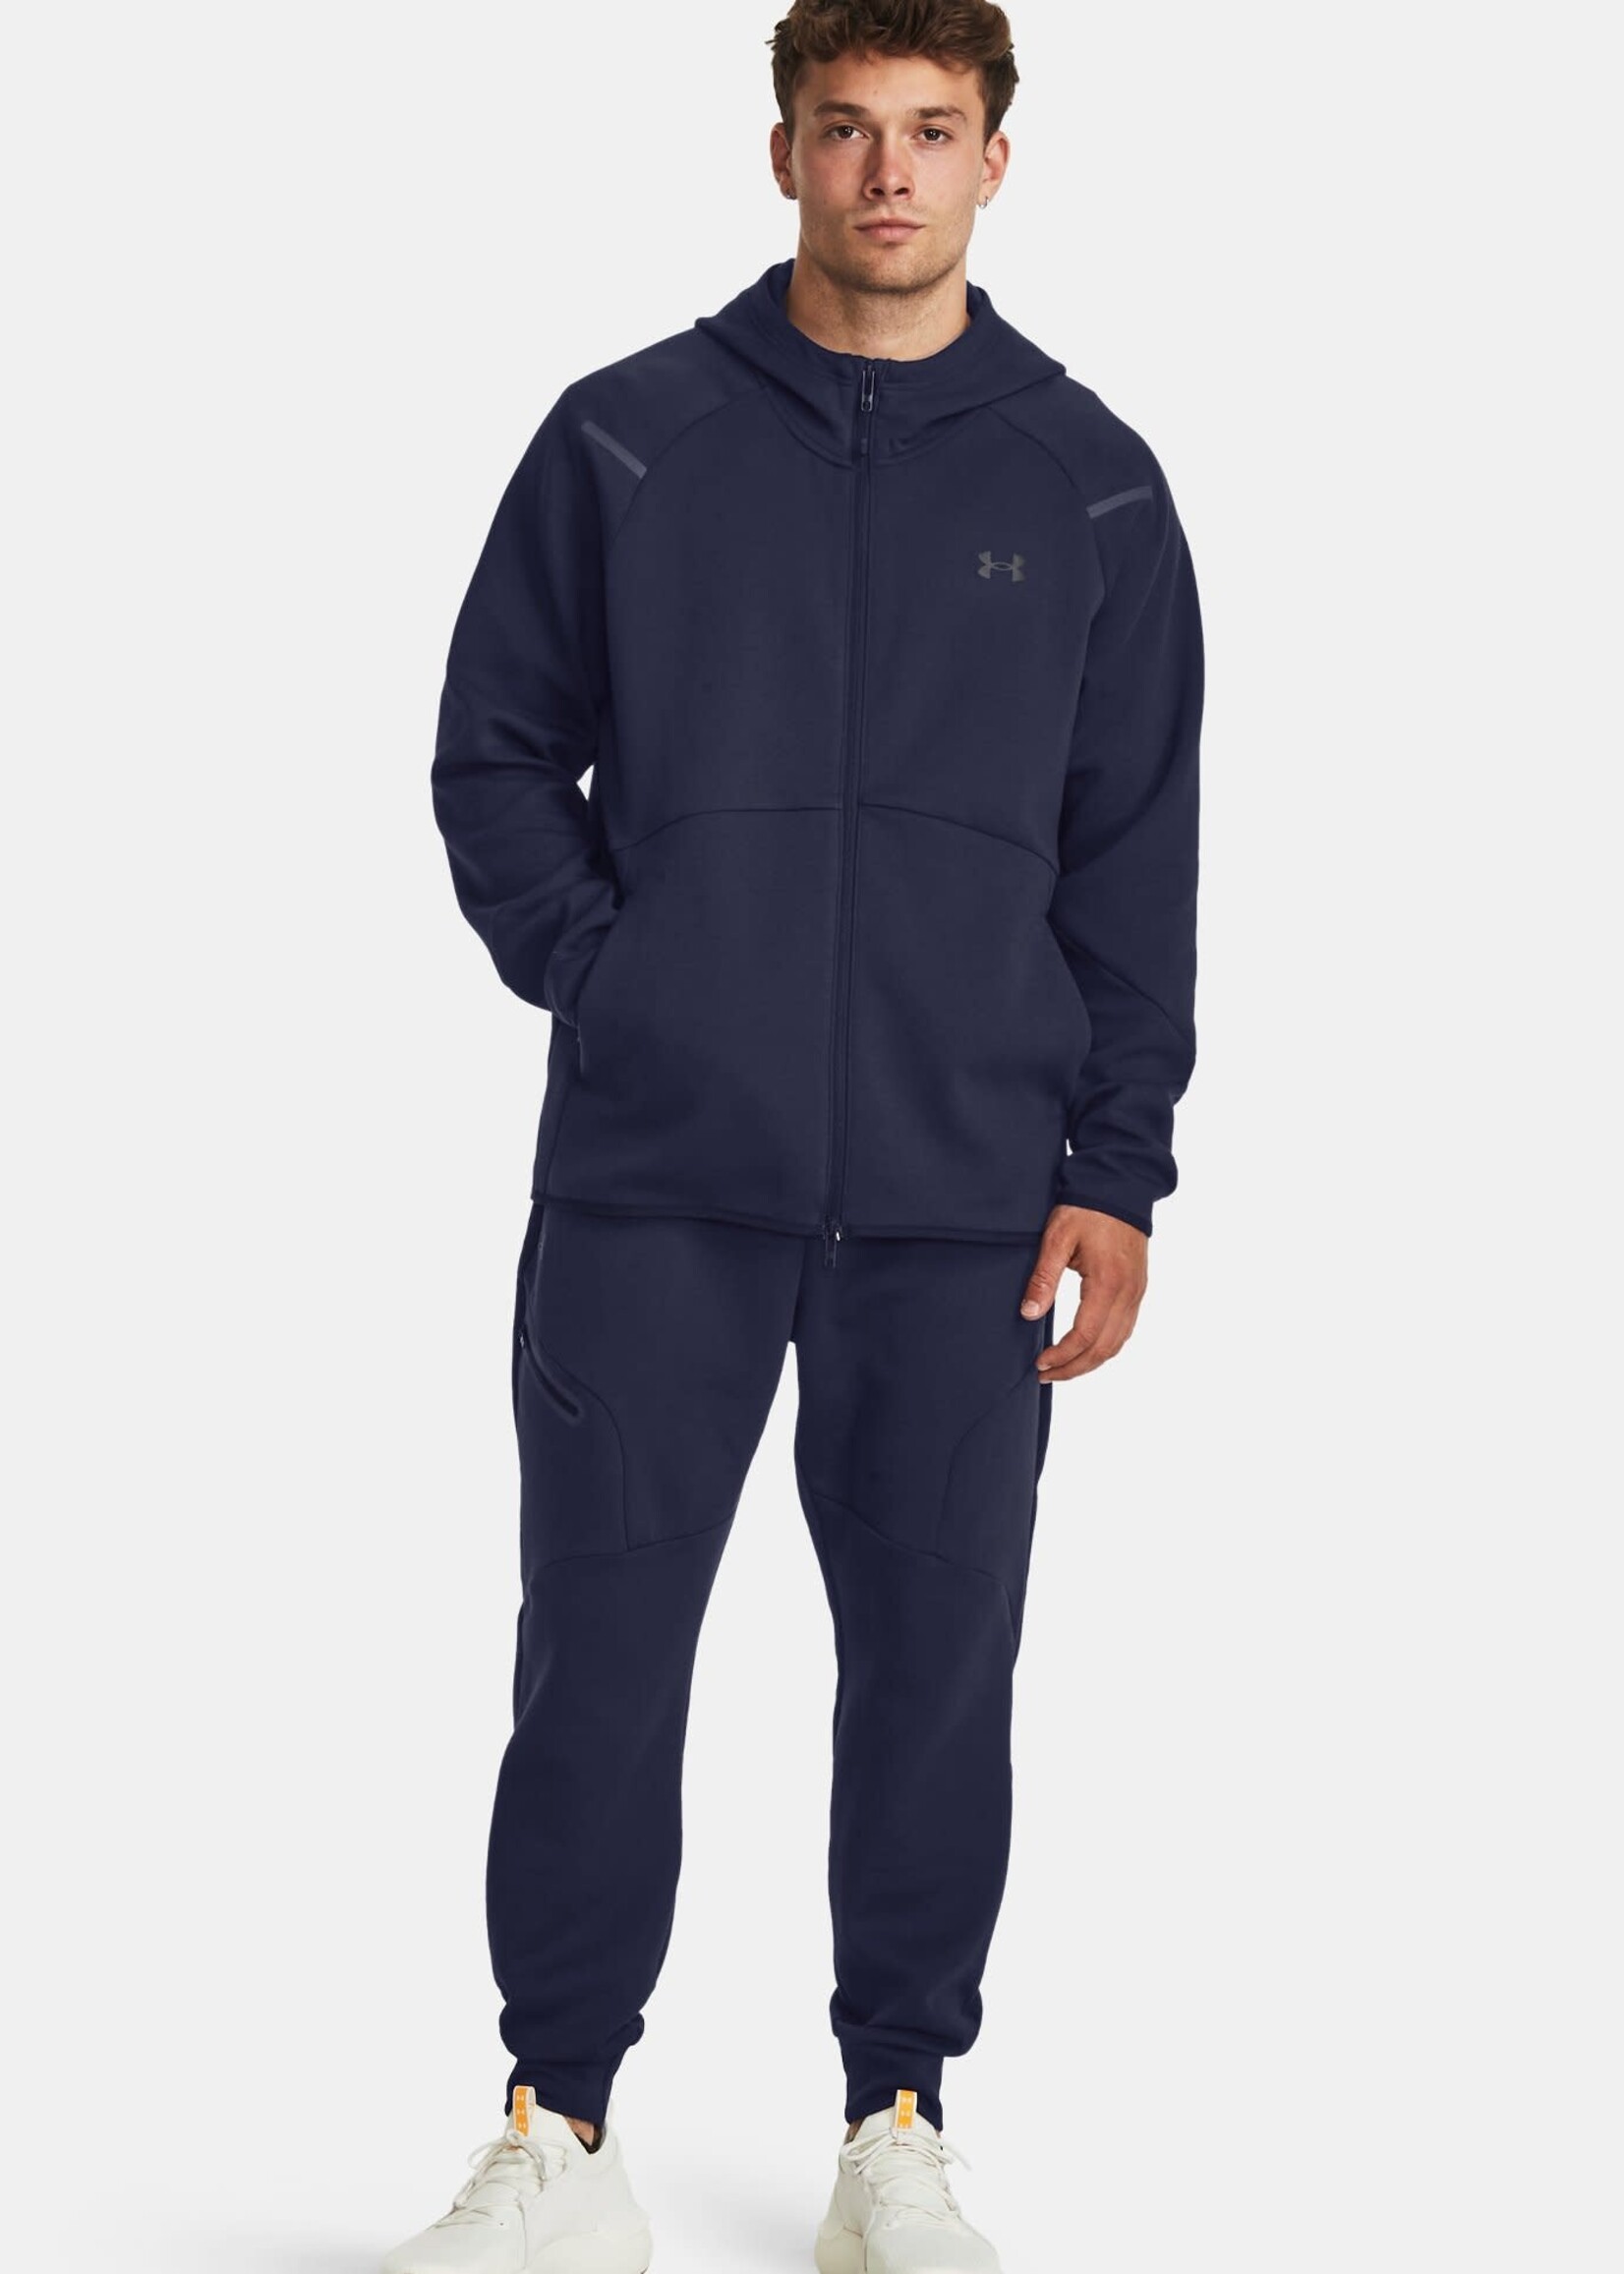 Under Armour Unstoppable Fleece FZ Hoodie - navy